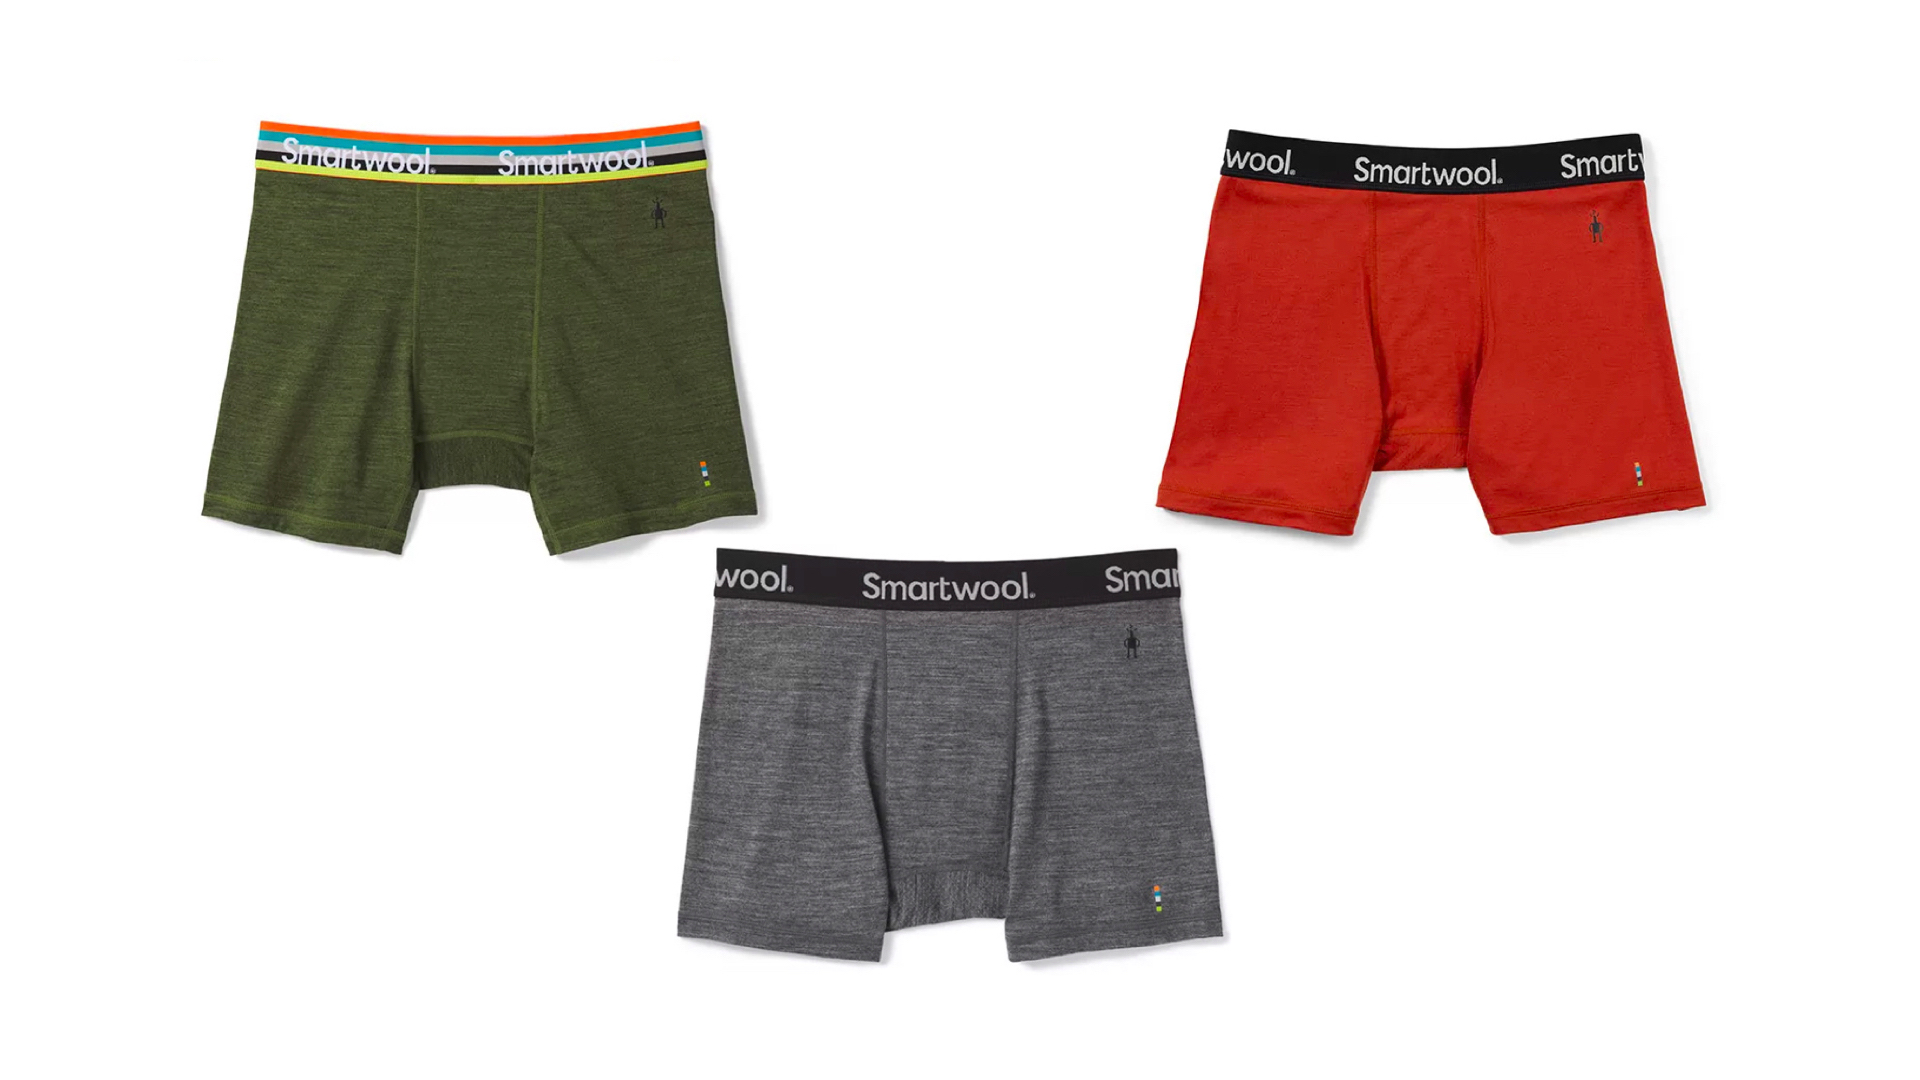 Smartwool Merino 150 Boxer Briefs Review: Soft Wool Underwear That's  Breathable and Comfortable